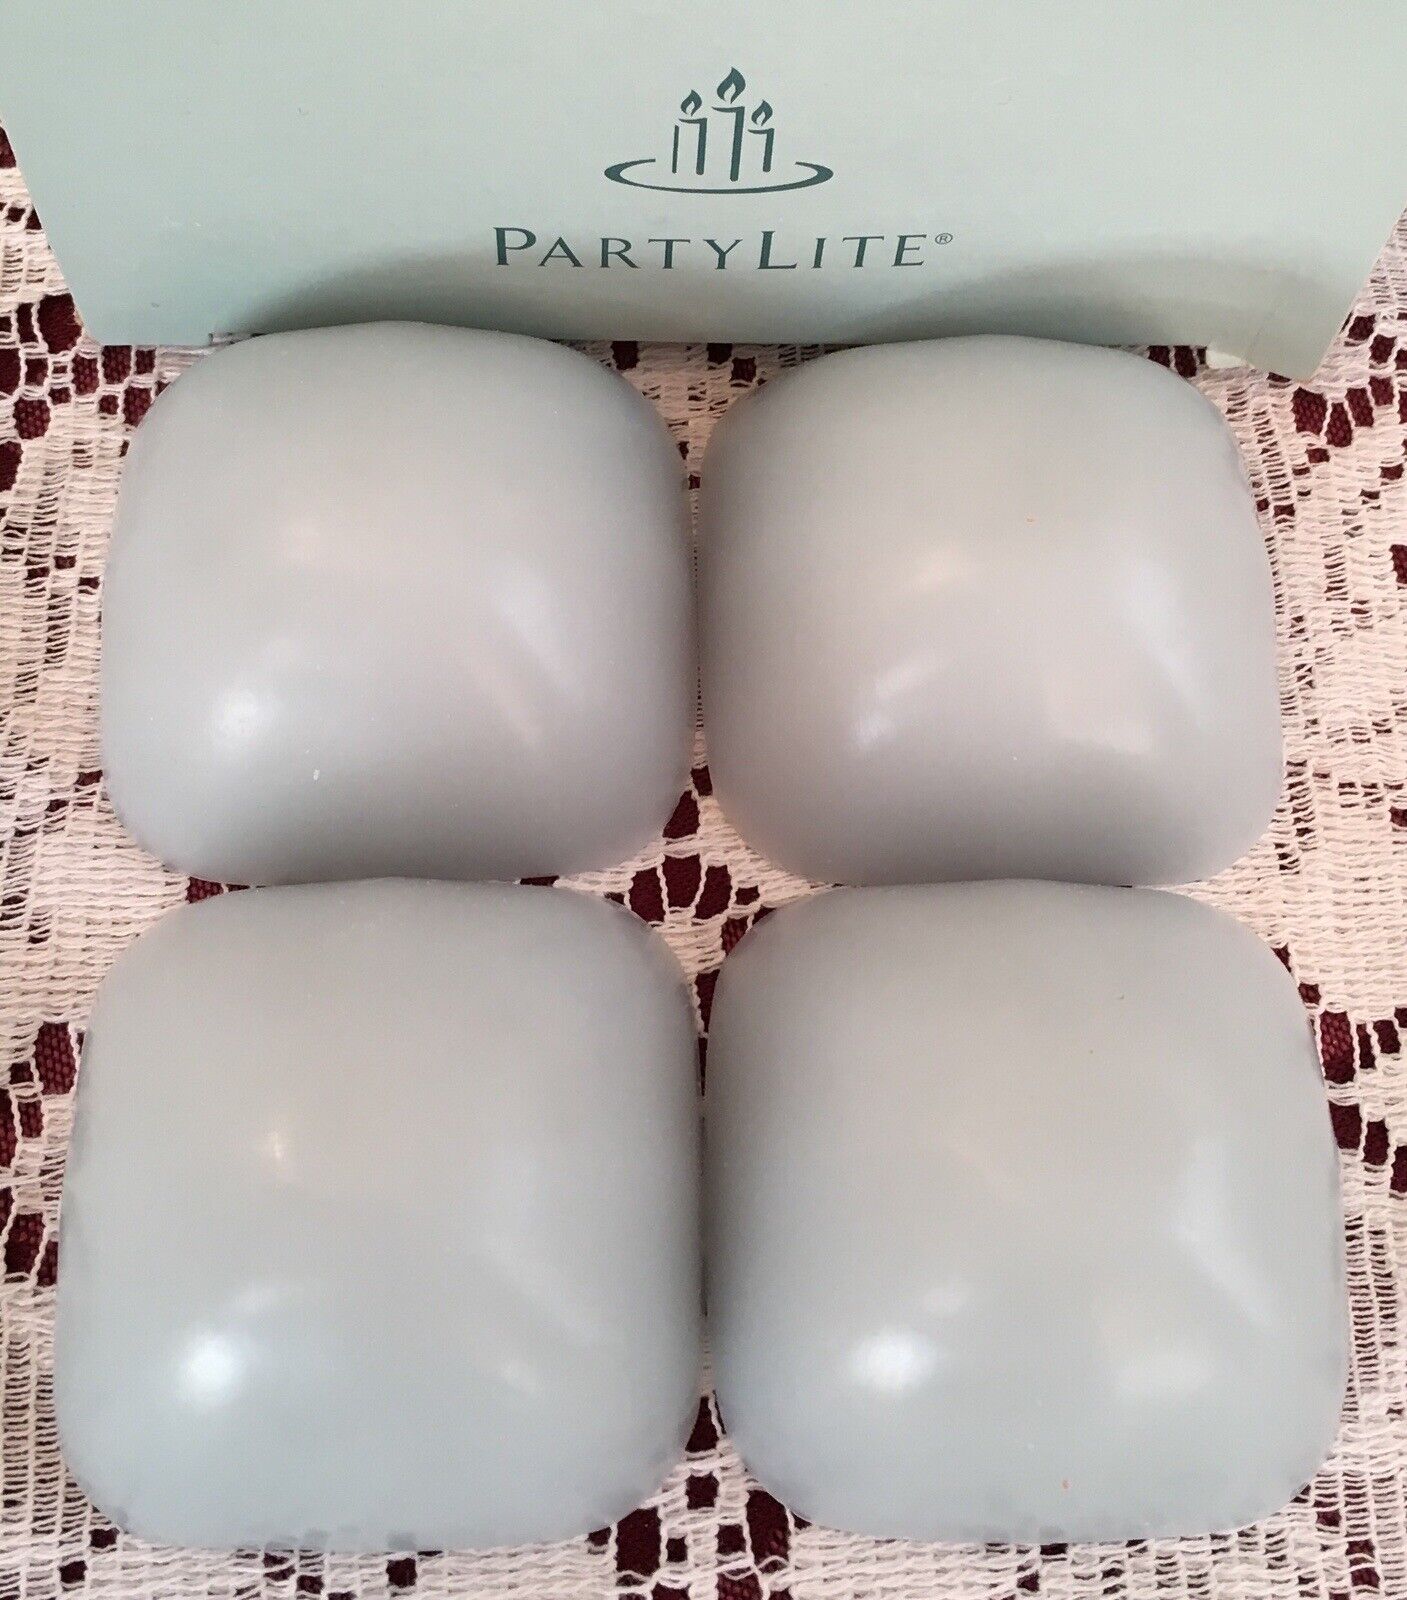 PartyLite RELAX Aroma Melts Z24142 NIB 4 New Tart Warmer Well Being Retired